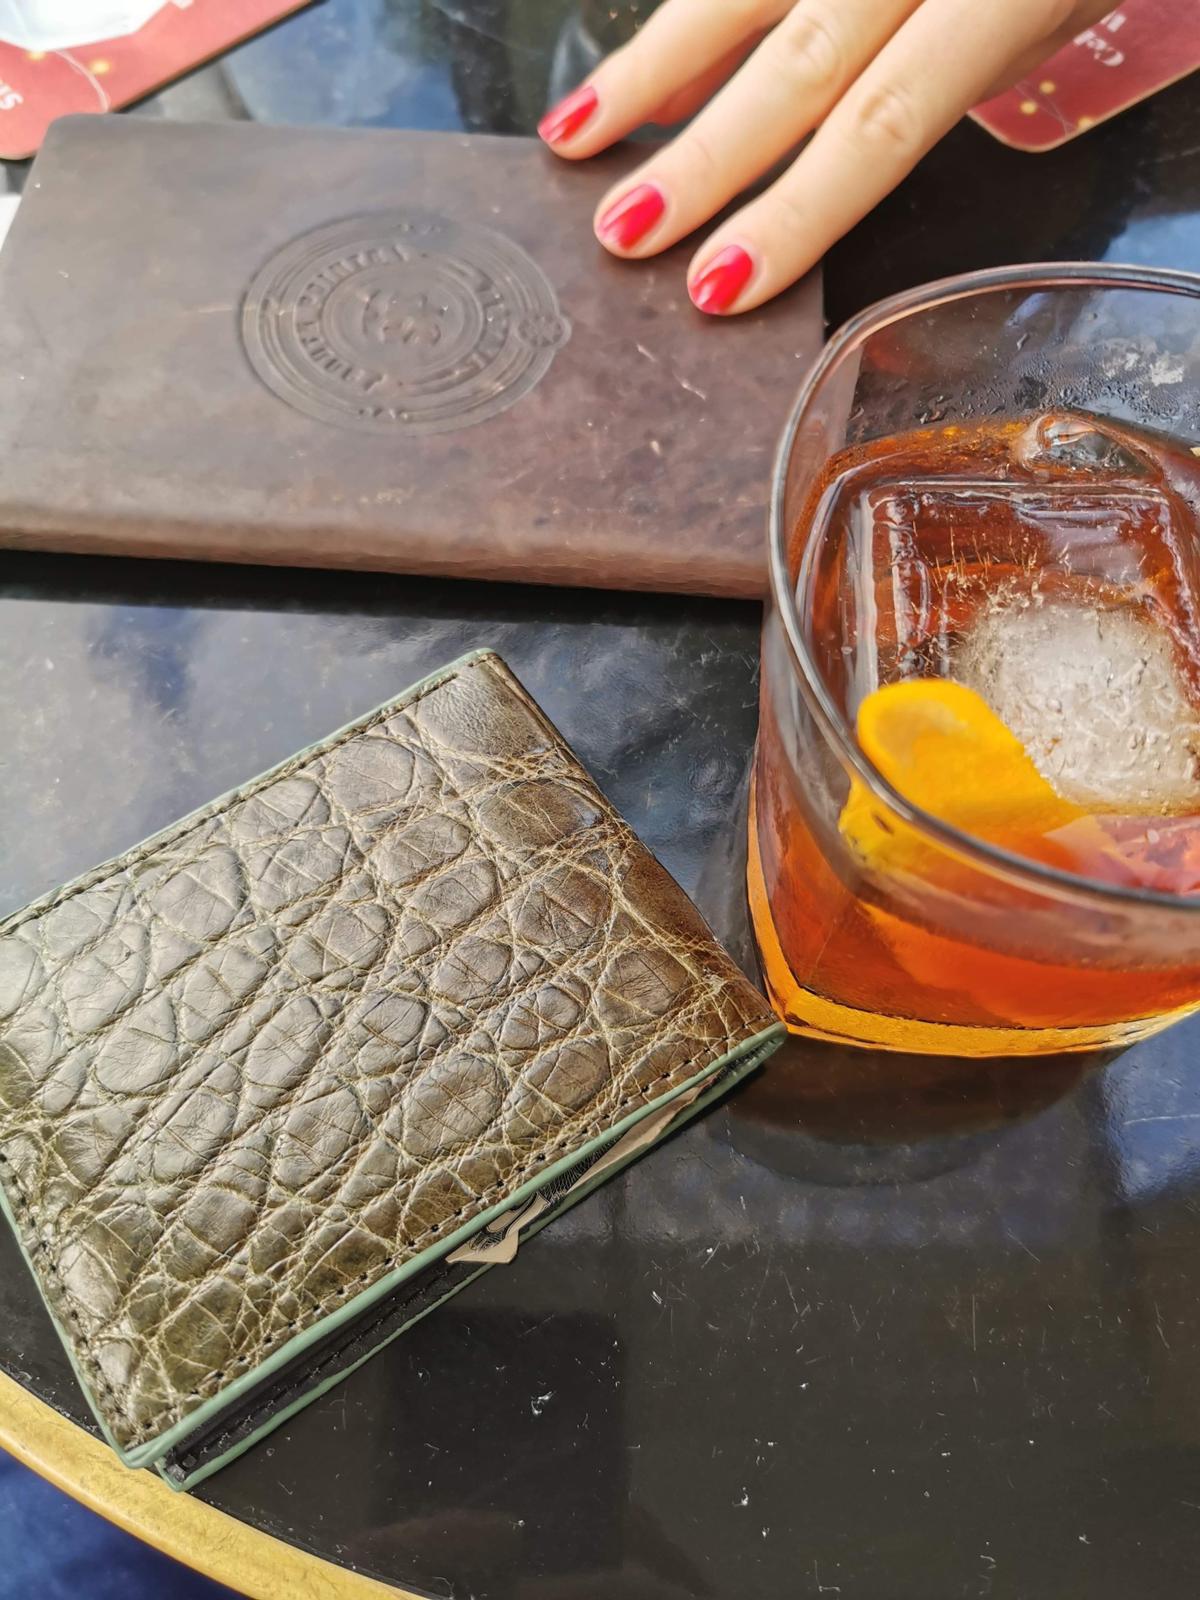 Whisky Ostrich Leather Wallet